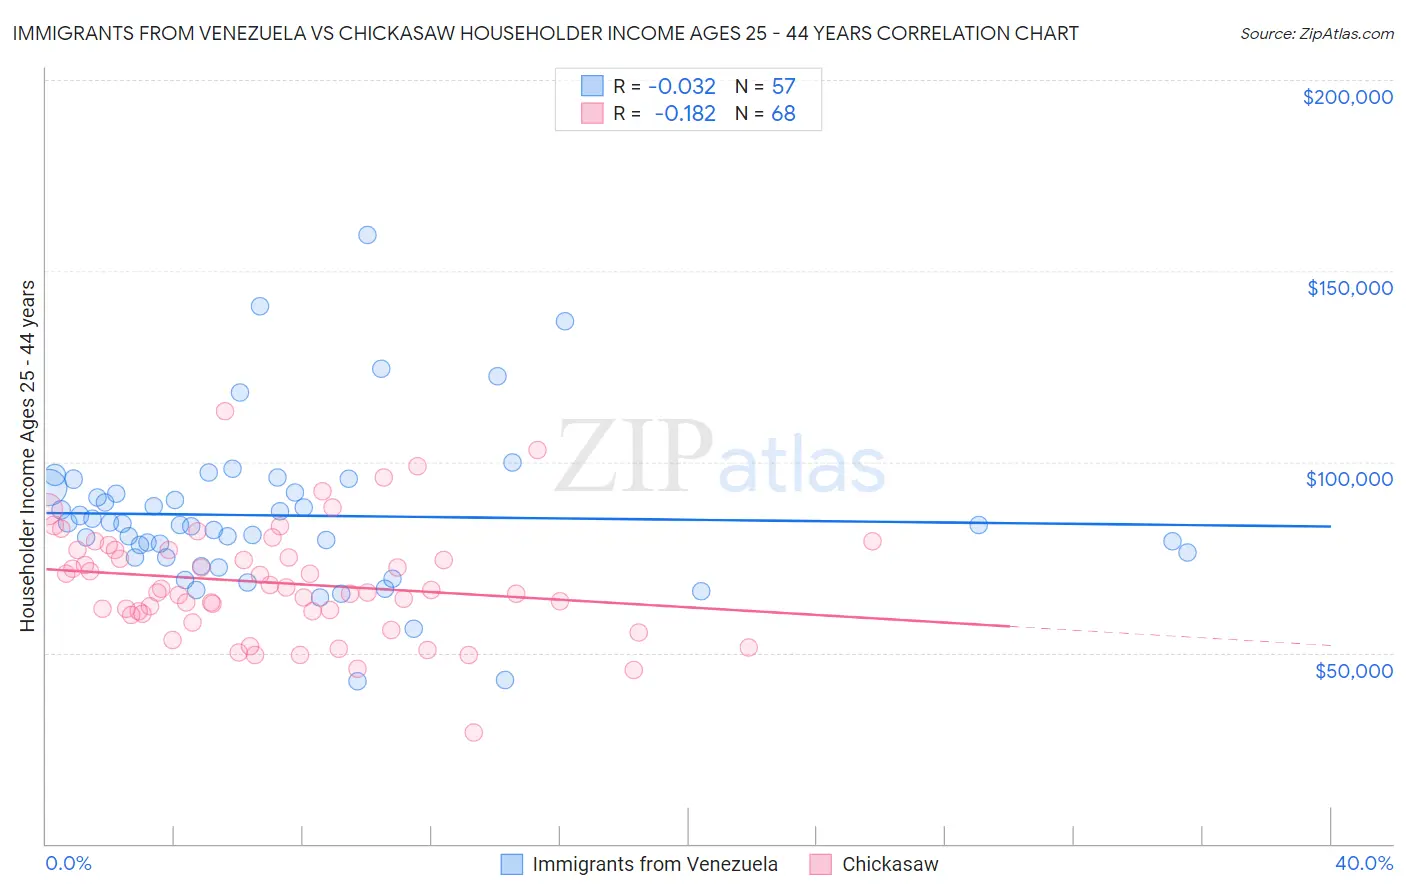 Immigrants from Venezuela vs Chickasaw Householder Income Ages 25 - 44 years